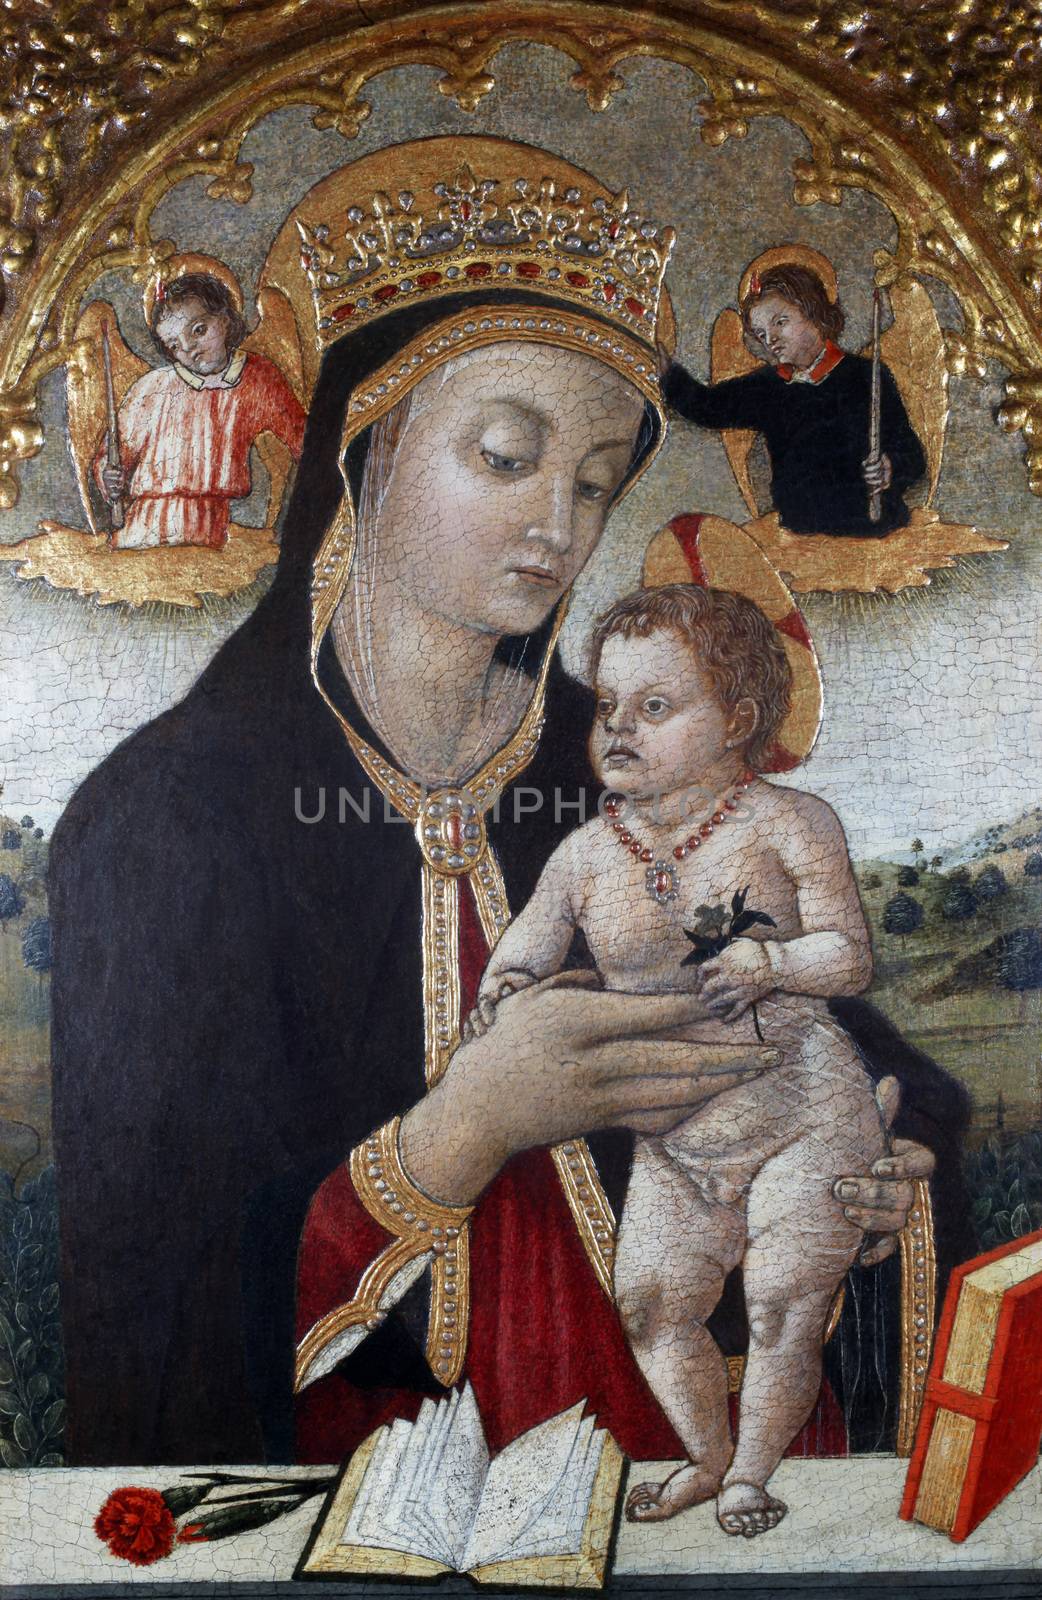 Vittore Crivelli: Madonna with Child, exhibited at the Great Masters Renaissance in Croatia, opened December 12, 2011. in Zagreb, Croatia